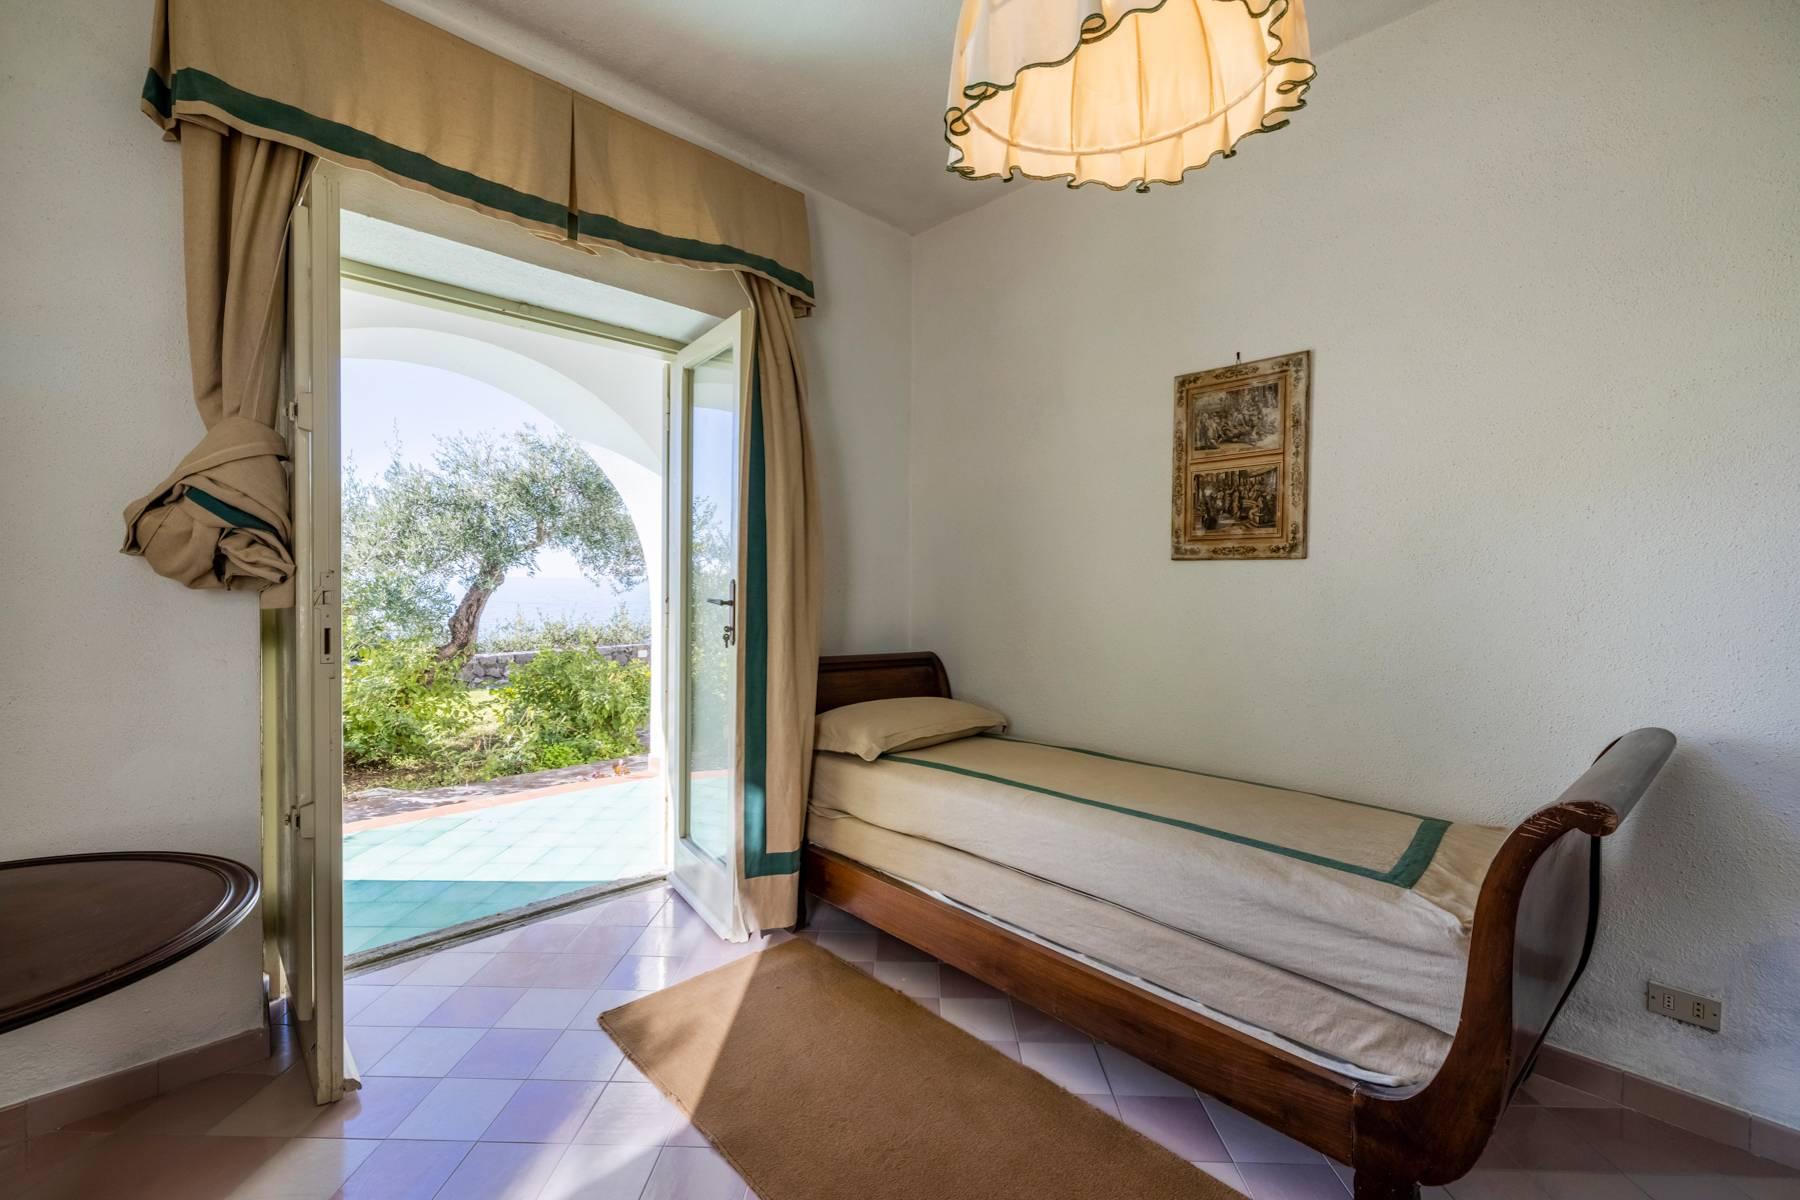 Villa pieds dans l'eau with garden and private access to the sea - 15